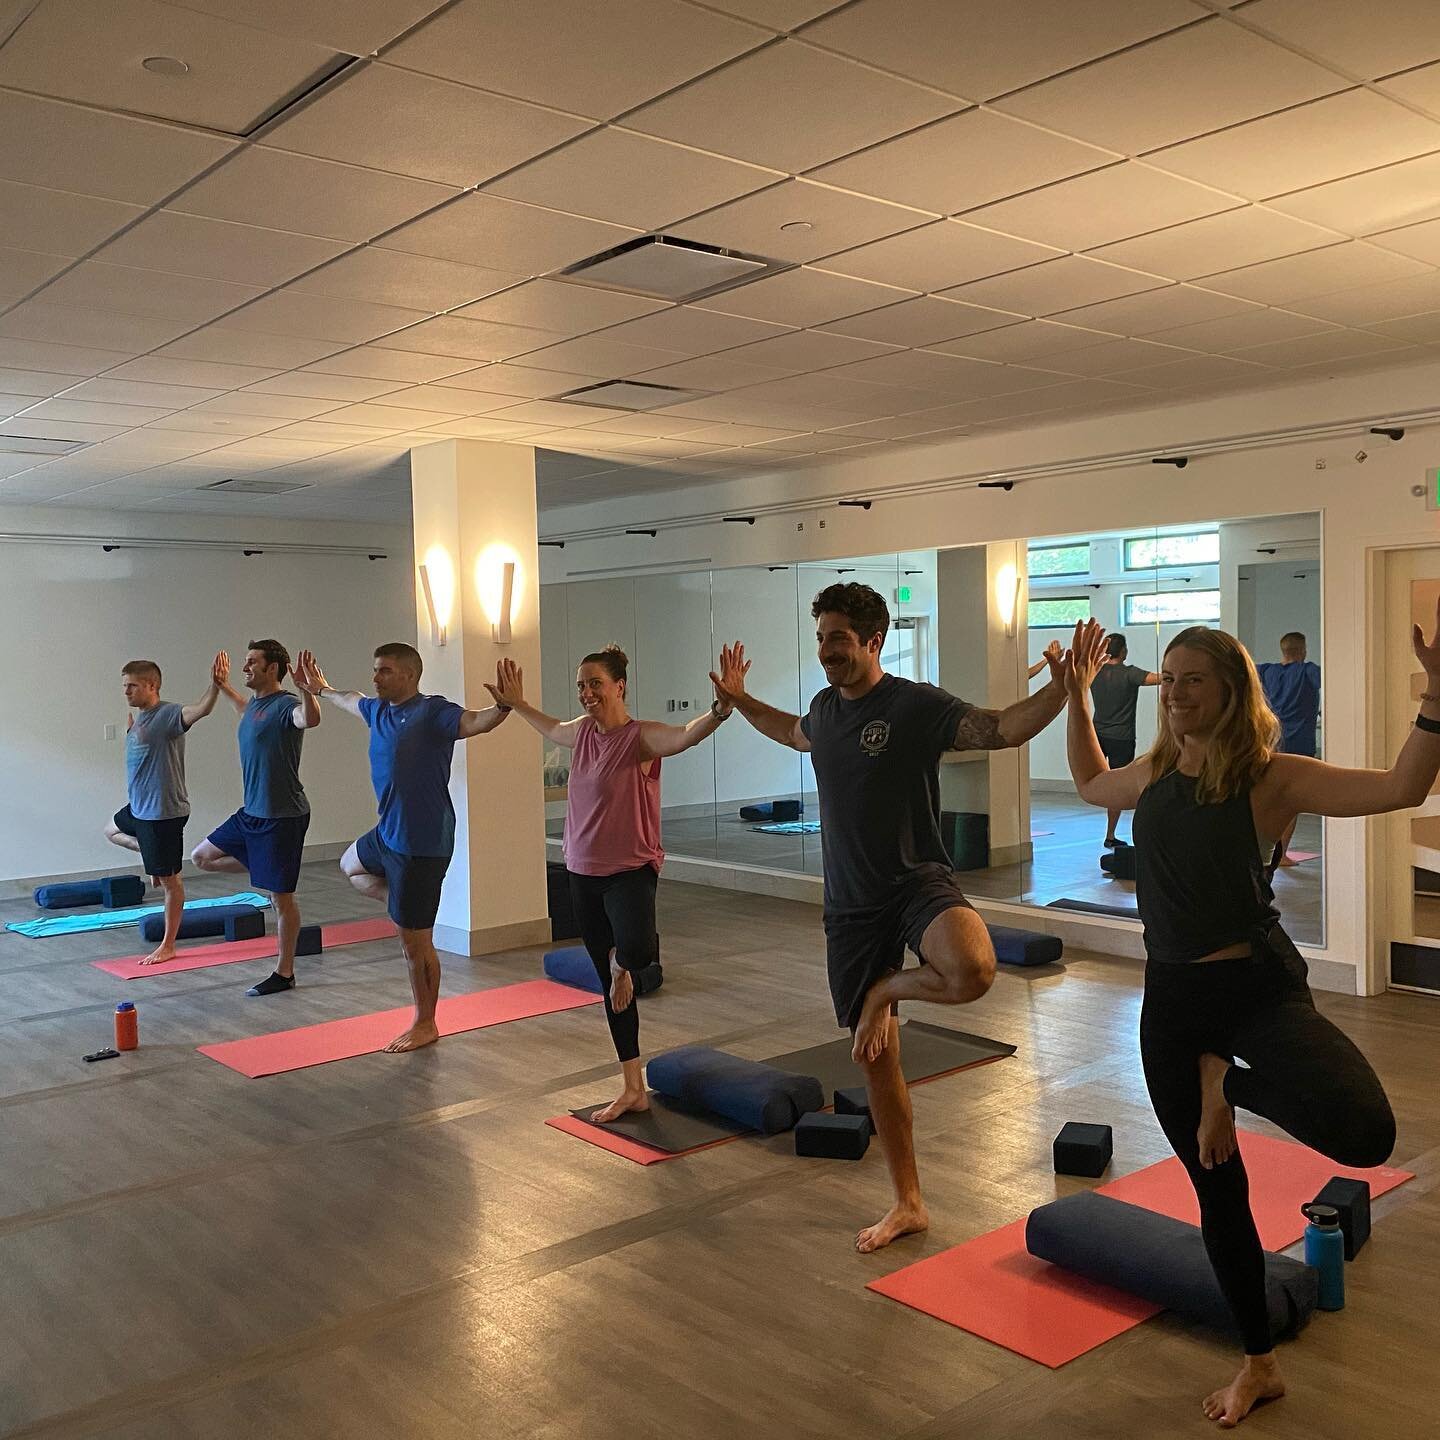 Thank you @aliajess for our first responder yoga class today @yogapearl. It was very relaxing with many great breathing techniques and we look forward to many more!